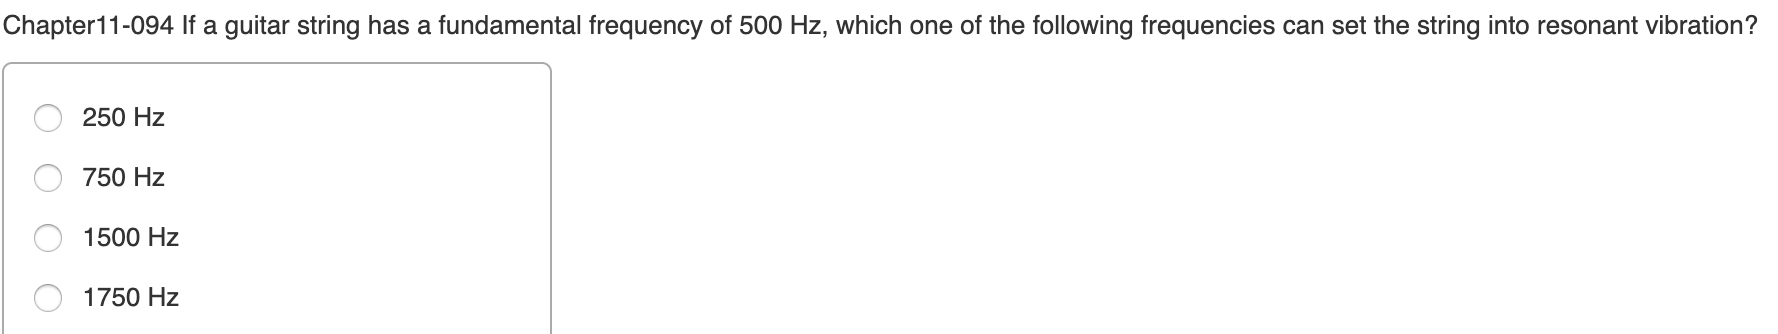 Chapter11-094 If a guitar string has a fundamental frequency of 500 Hz, which one of the following frequencies can set the string into resonant vibration?
250 Hz
750 Hz
1500 Hz
1750 Hz
